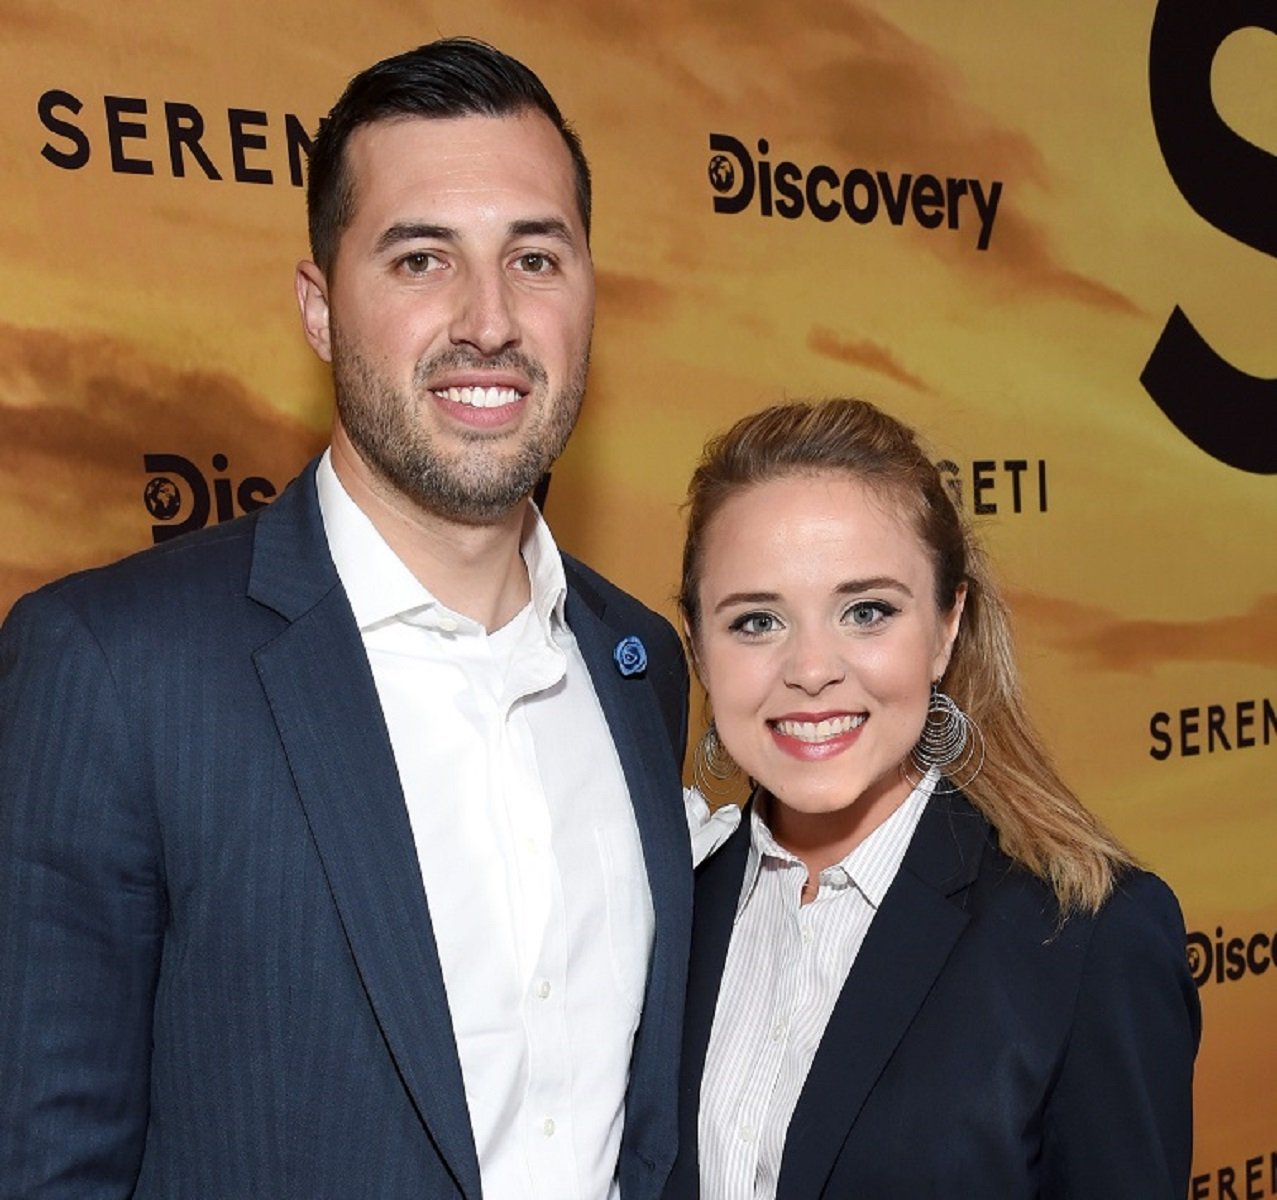 Jinger and Jeremy Vuolo posing together at the premiere of Discovery's 'Serengeti' in 2019, both wearing suits